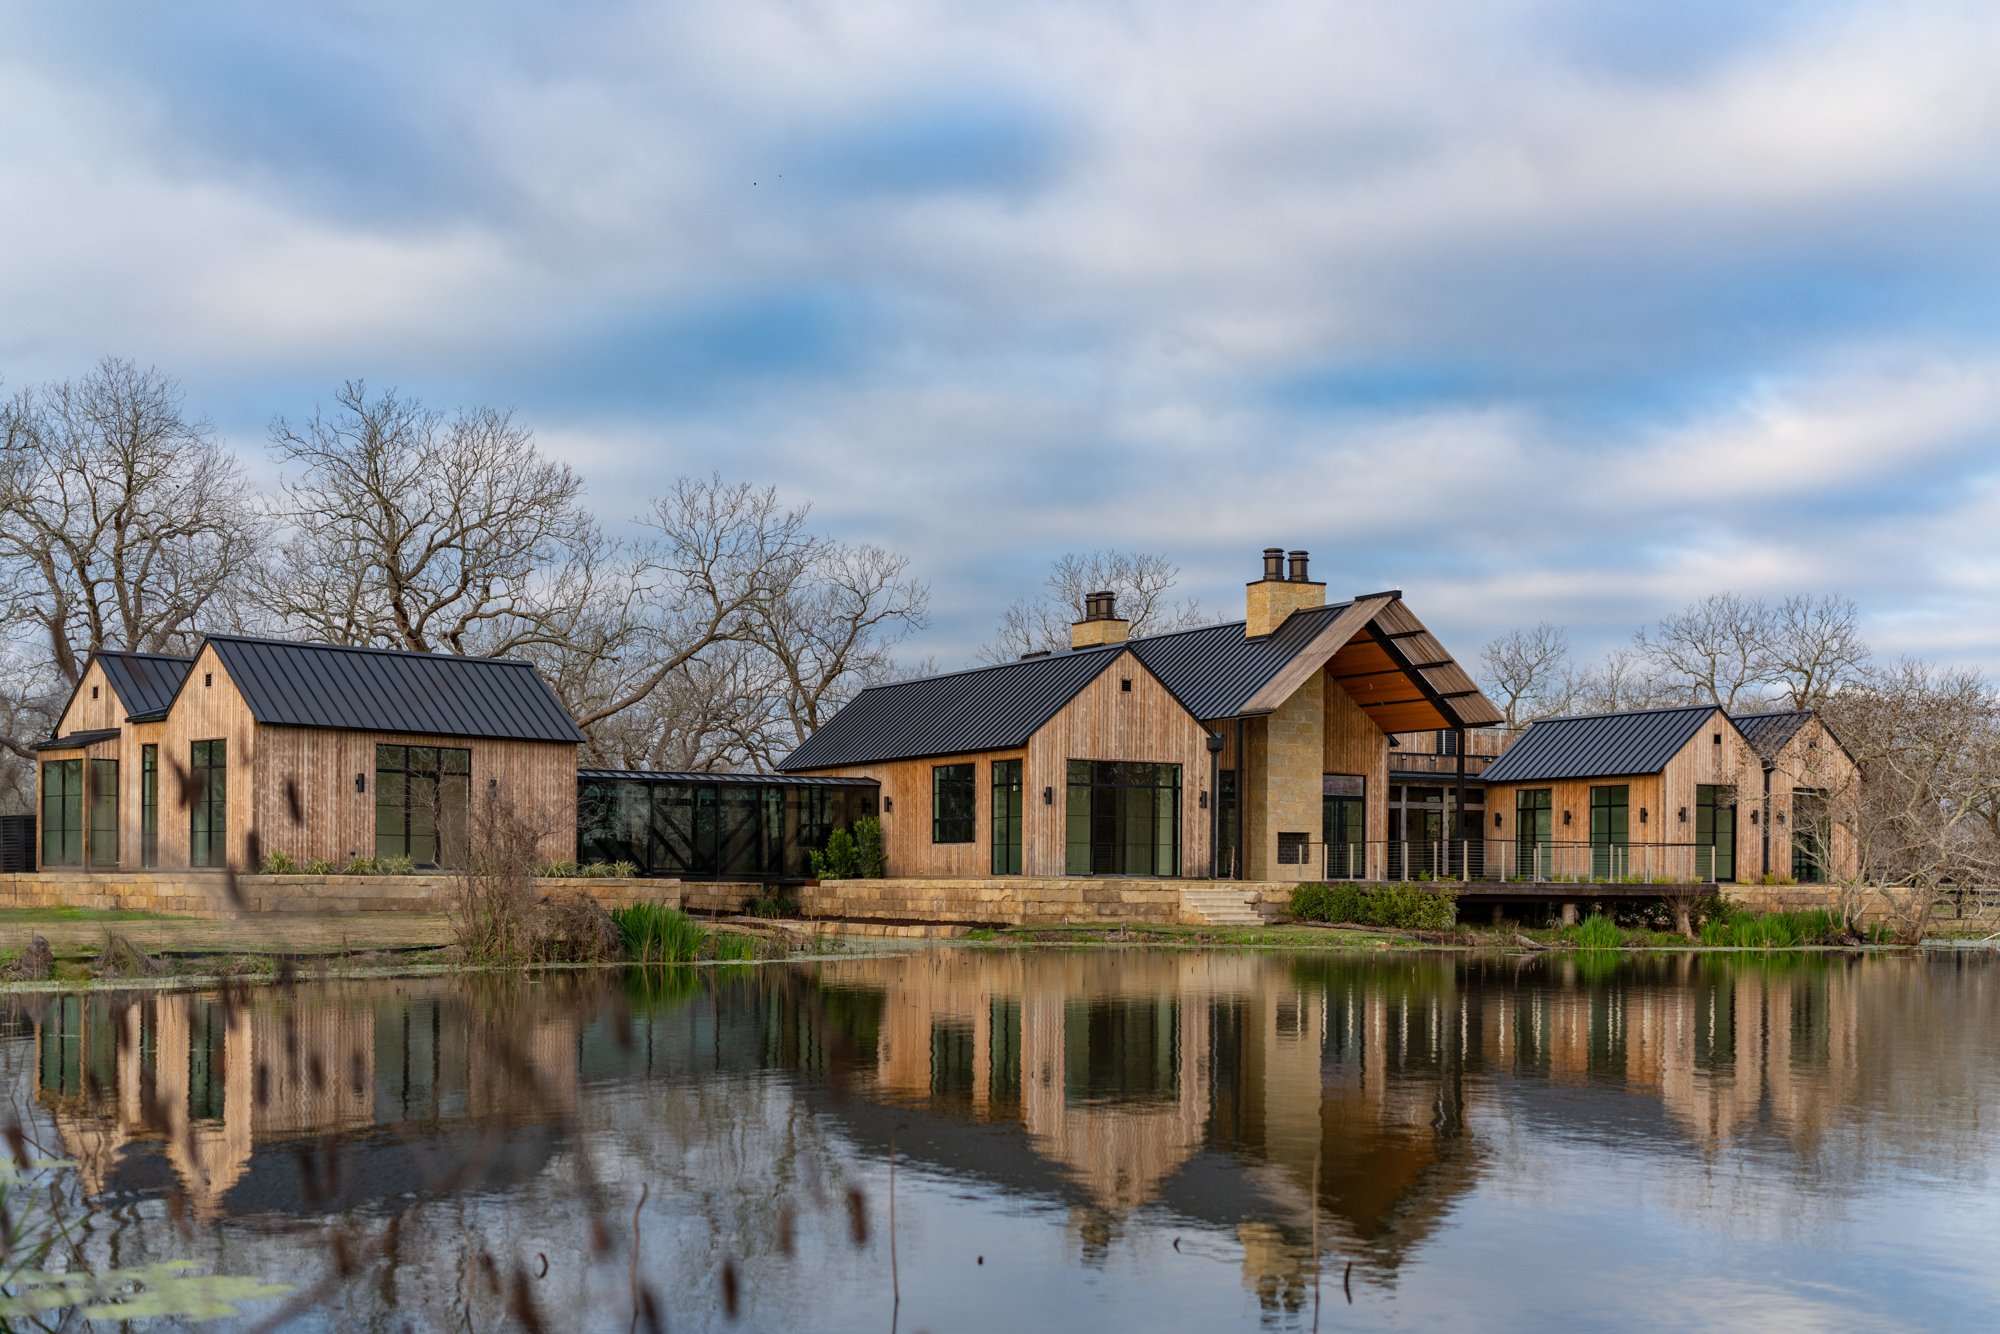 View from far away across the pond looking back at the Fulshear Modern Ranch Estate featuring Kebony Modified Wood Character Decking in Fulshear, Texas on a cloudy evening